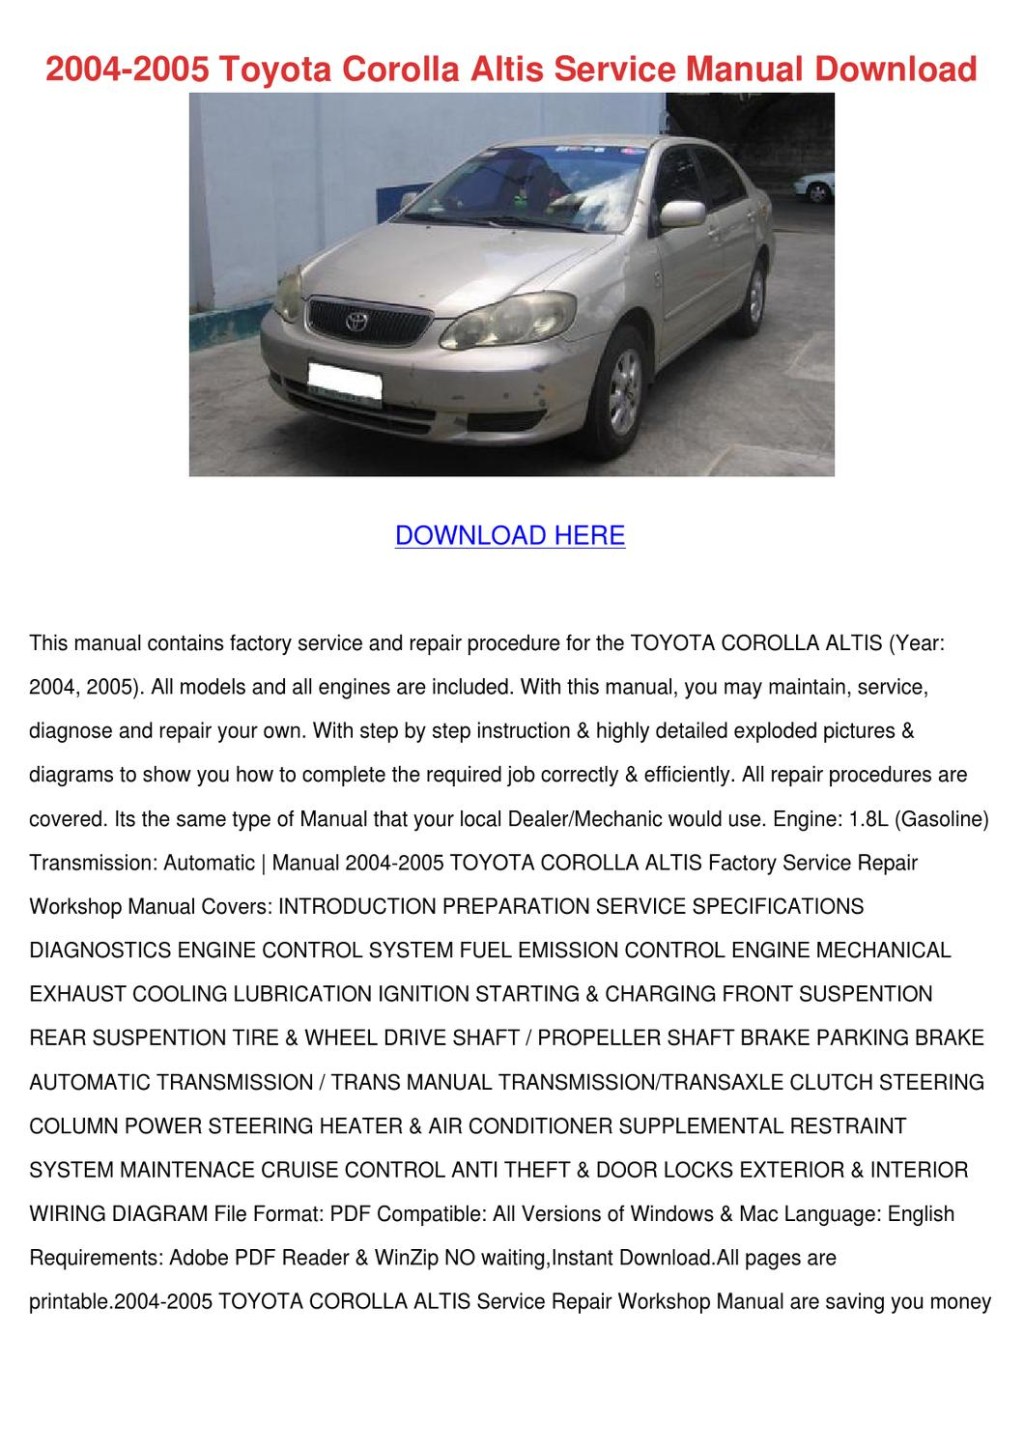 Picture of: Toyota Corolla Altis Service Manual by MapleMartindale